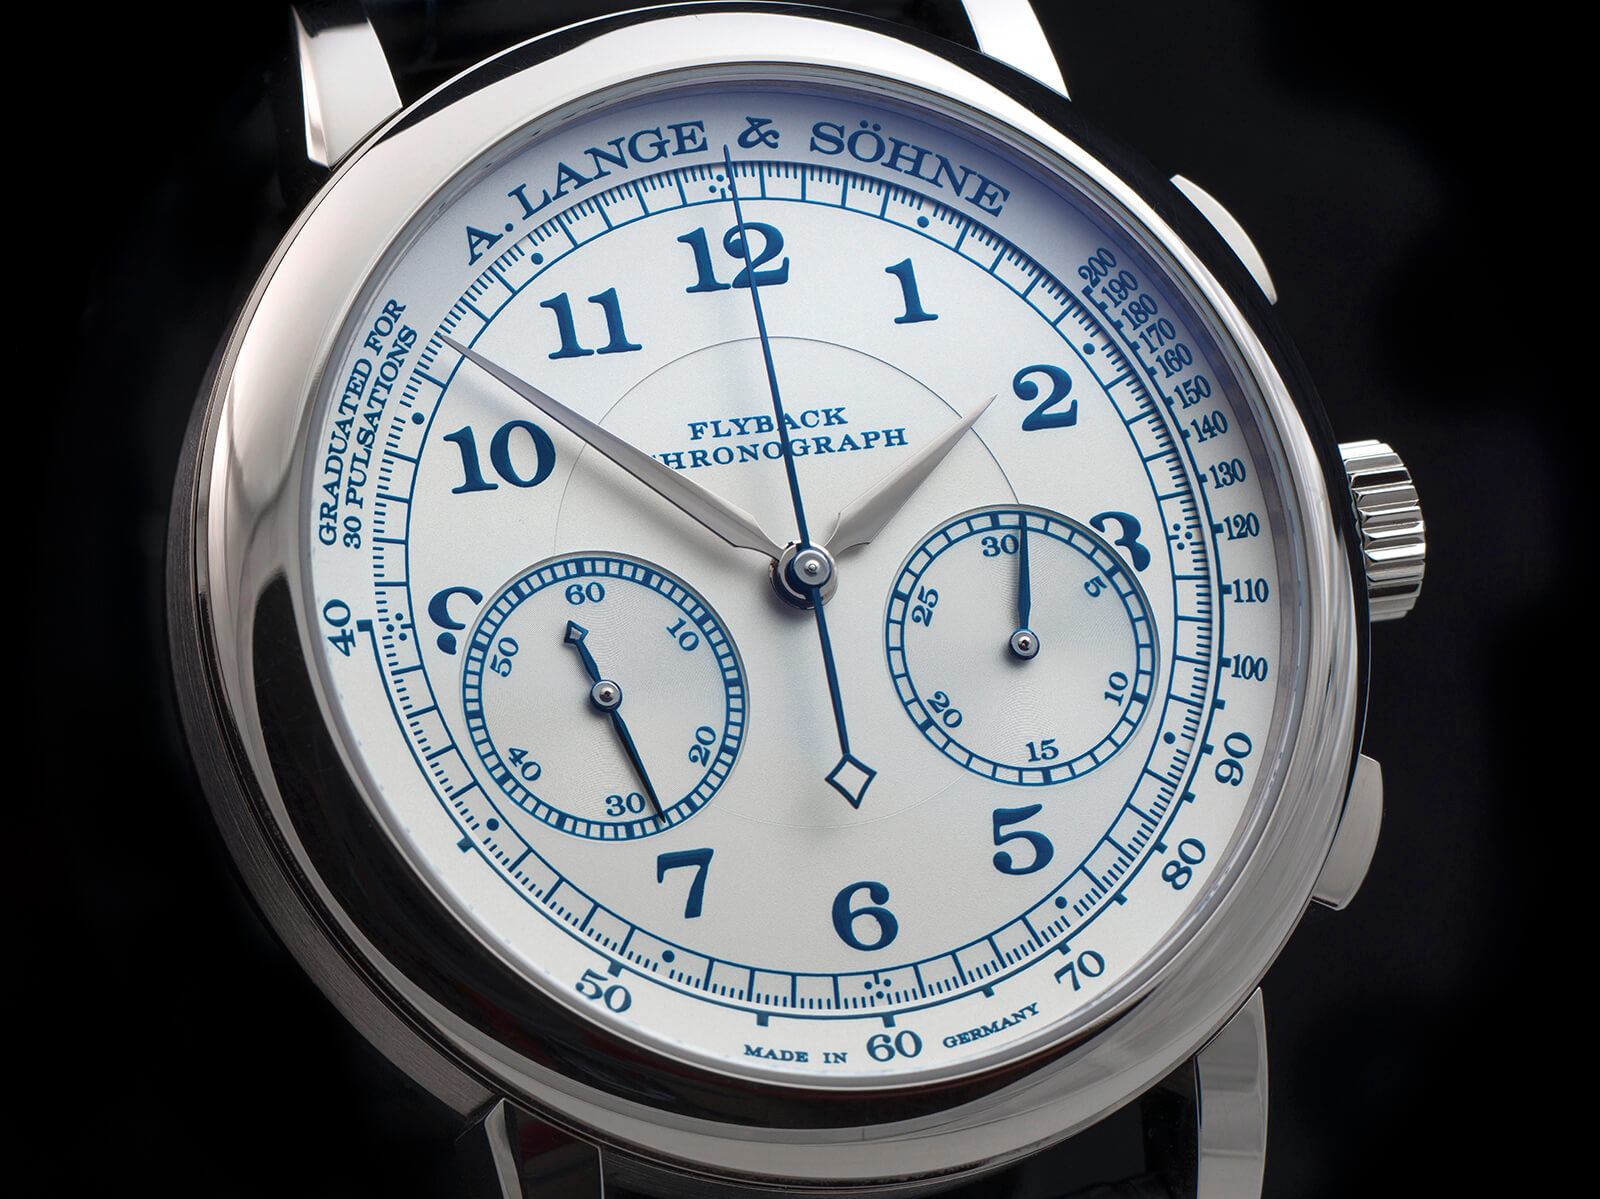 No piece of cake: tough-to-capture blue-on-white of the 1815 Chronograph Boutique Edition